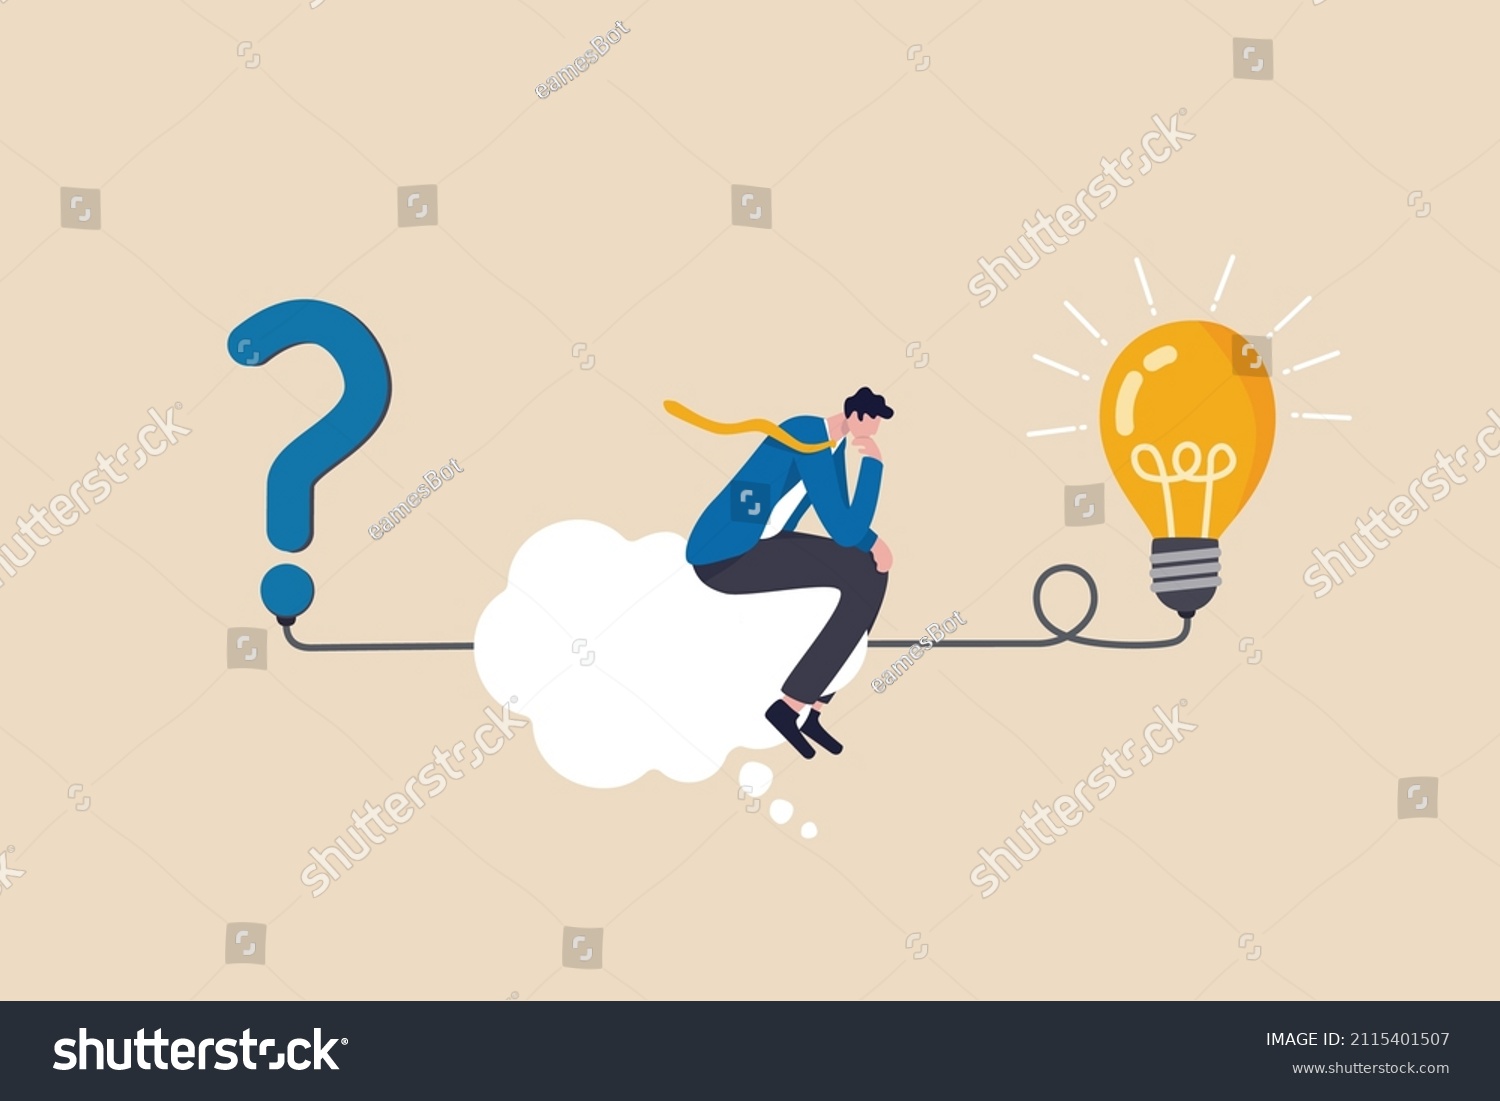 Problem solving skill, critical thinking or finding solution to solve problem, answer question, creativity or imagination, businessman on thinking bubble connect question mark to lightbulb solution. #2115401507